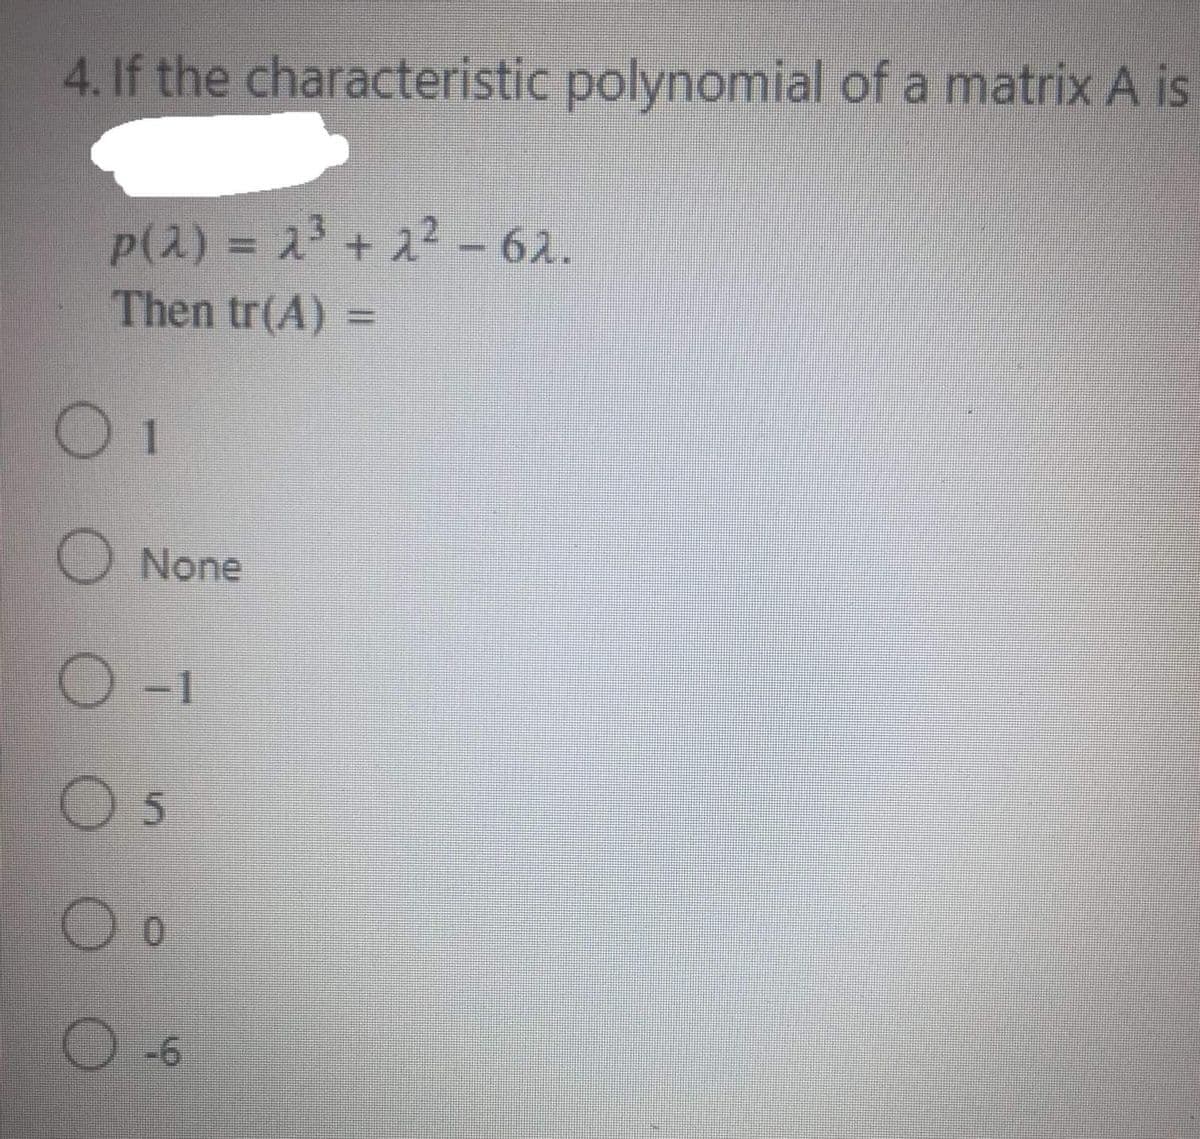 4. If the characteristic polynomial of a matrix A is
P(2) = 2 + 22 - 62.
Then tr(A) =
O None
O 5
O-6
